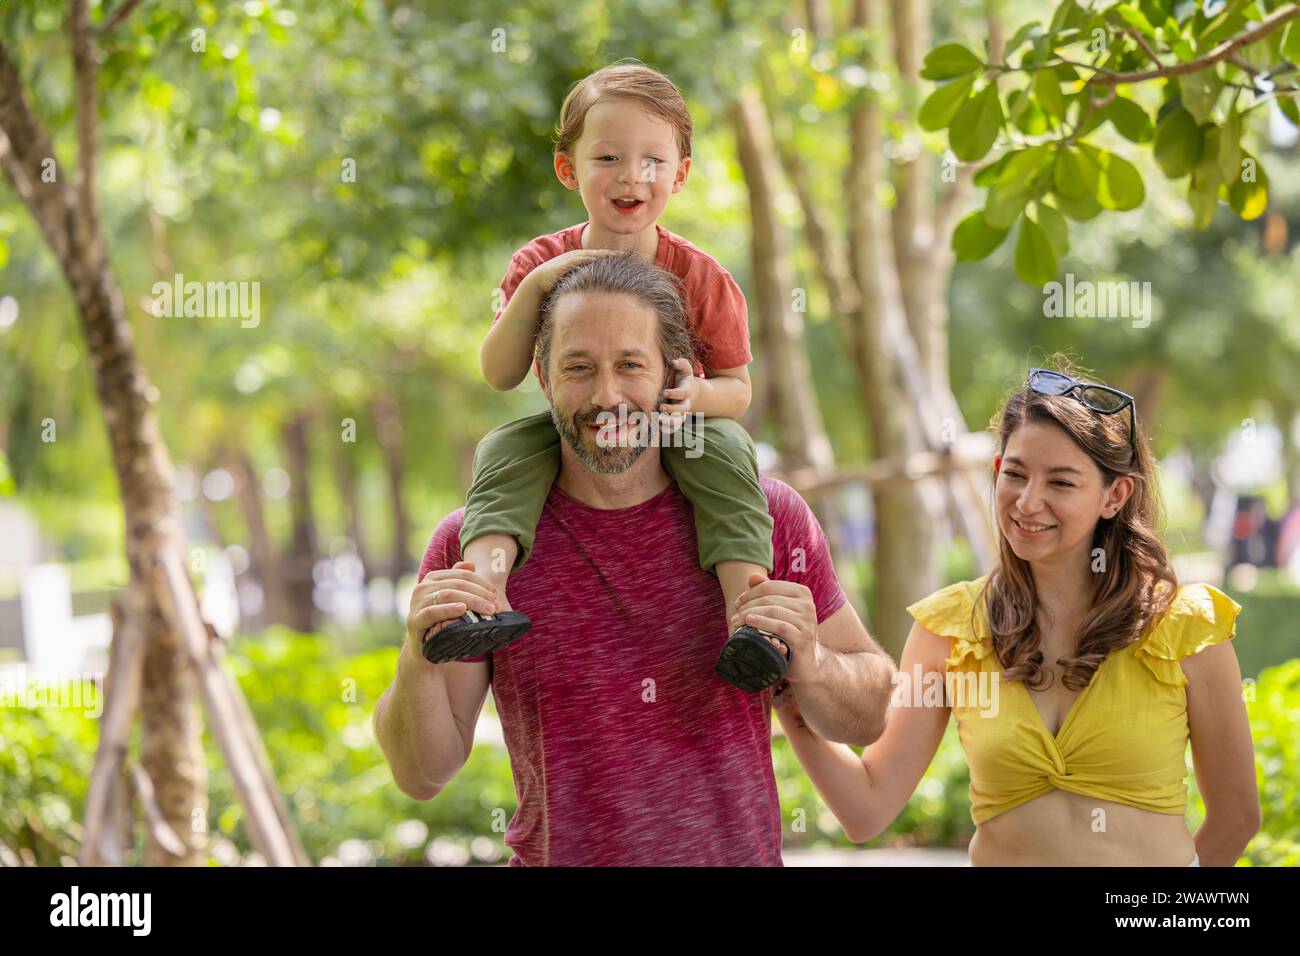 Happy family together walking in public green park young boy sitting on father shoulder around fresh ecology trees environment. Stock Photo